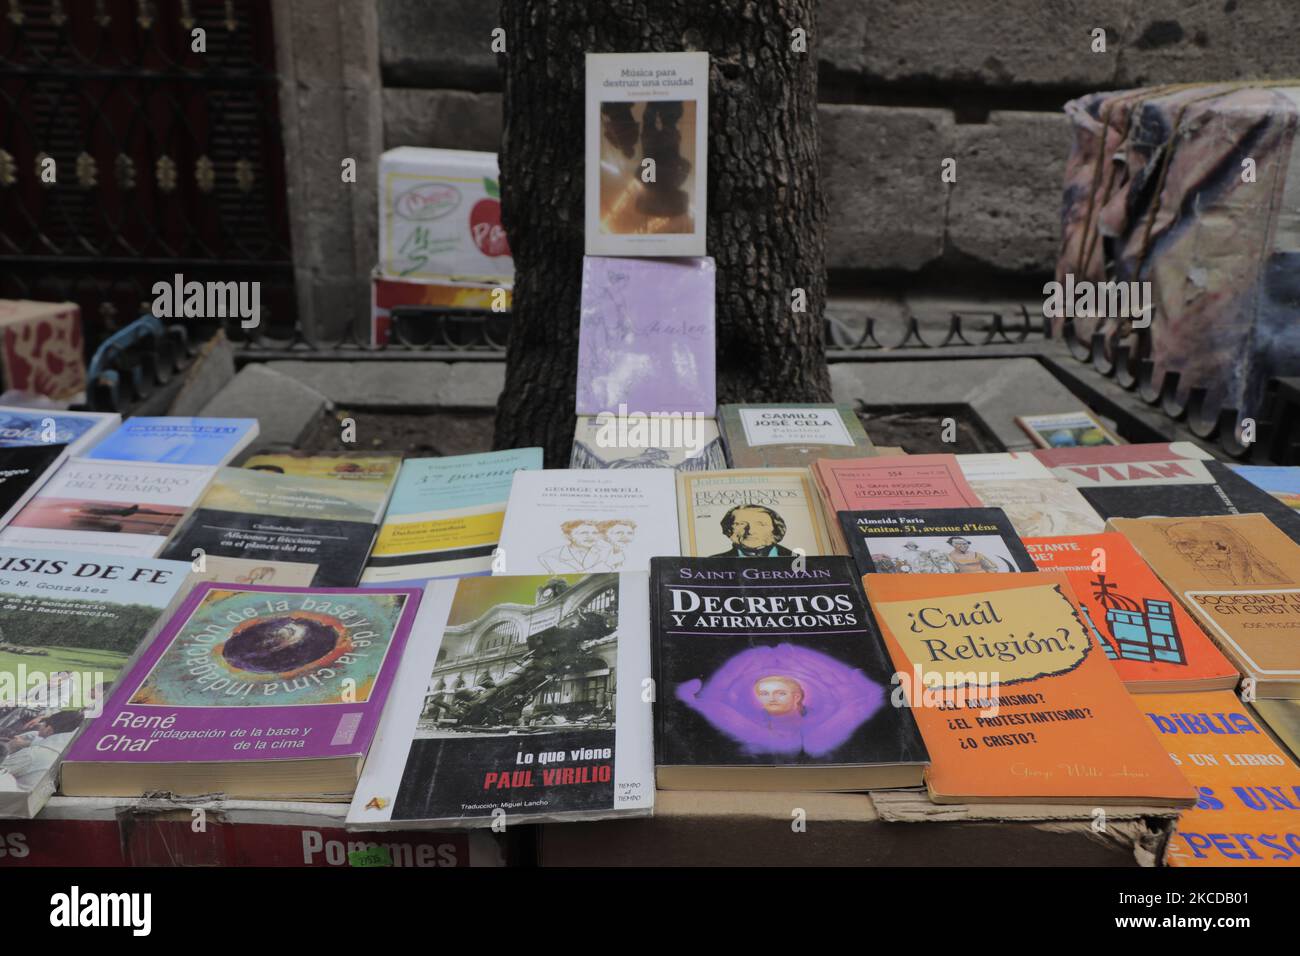 Interior view of a passage of books in the Zócalo of Mexico City, on the occasion of the International Book Day during the sanitary emergency and the orange epidemiological traffic light in the capital. International Book Day has been celebrated every April 23 since 1930 in Spain, and this date was chosen because it was related to the literary field, since it was the day on which Miguel de Cervantes, William Shakespeare and Inca Garcilaso de la Vega died, in 1616. (Photo by Gerardo Vieyra/NurPhoto) Stock Photo